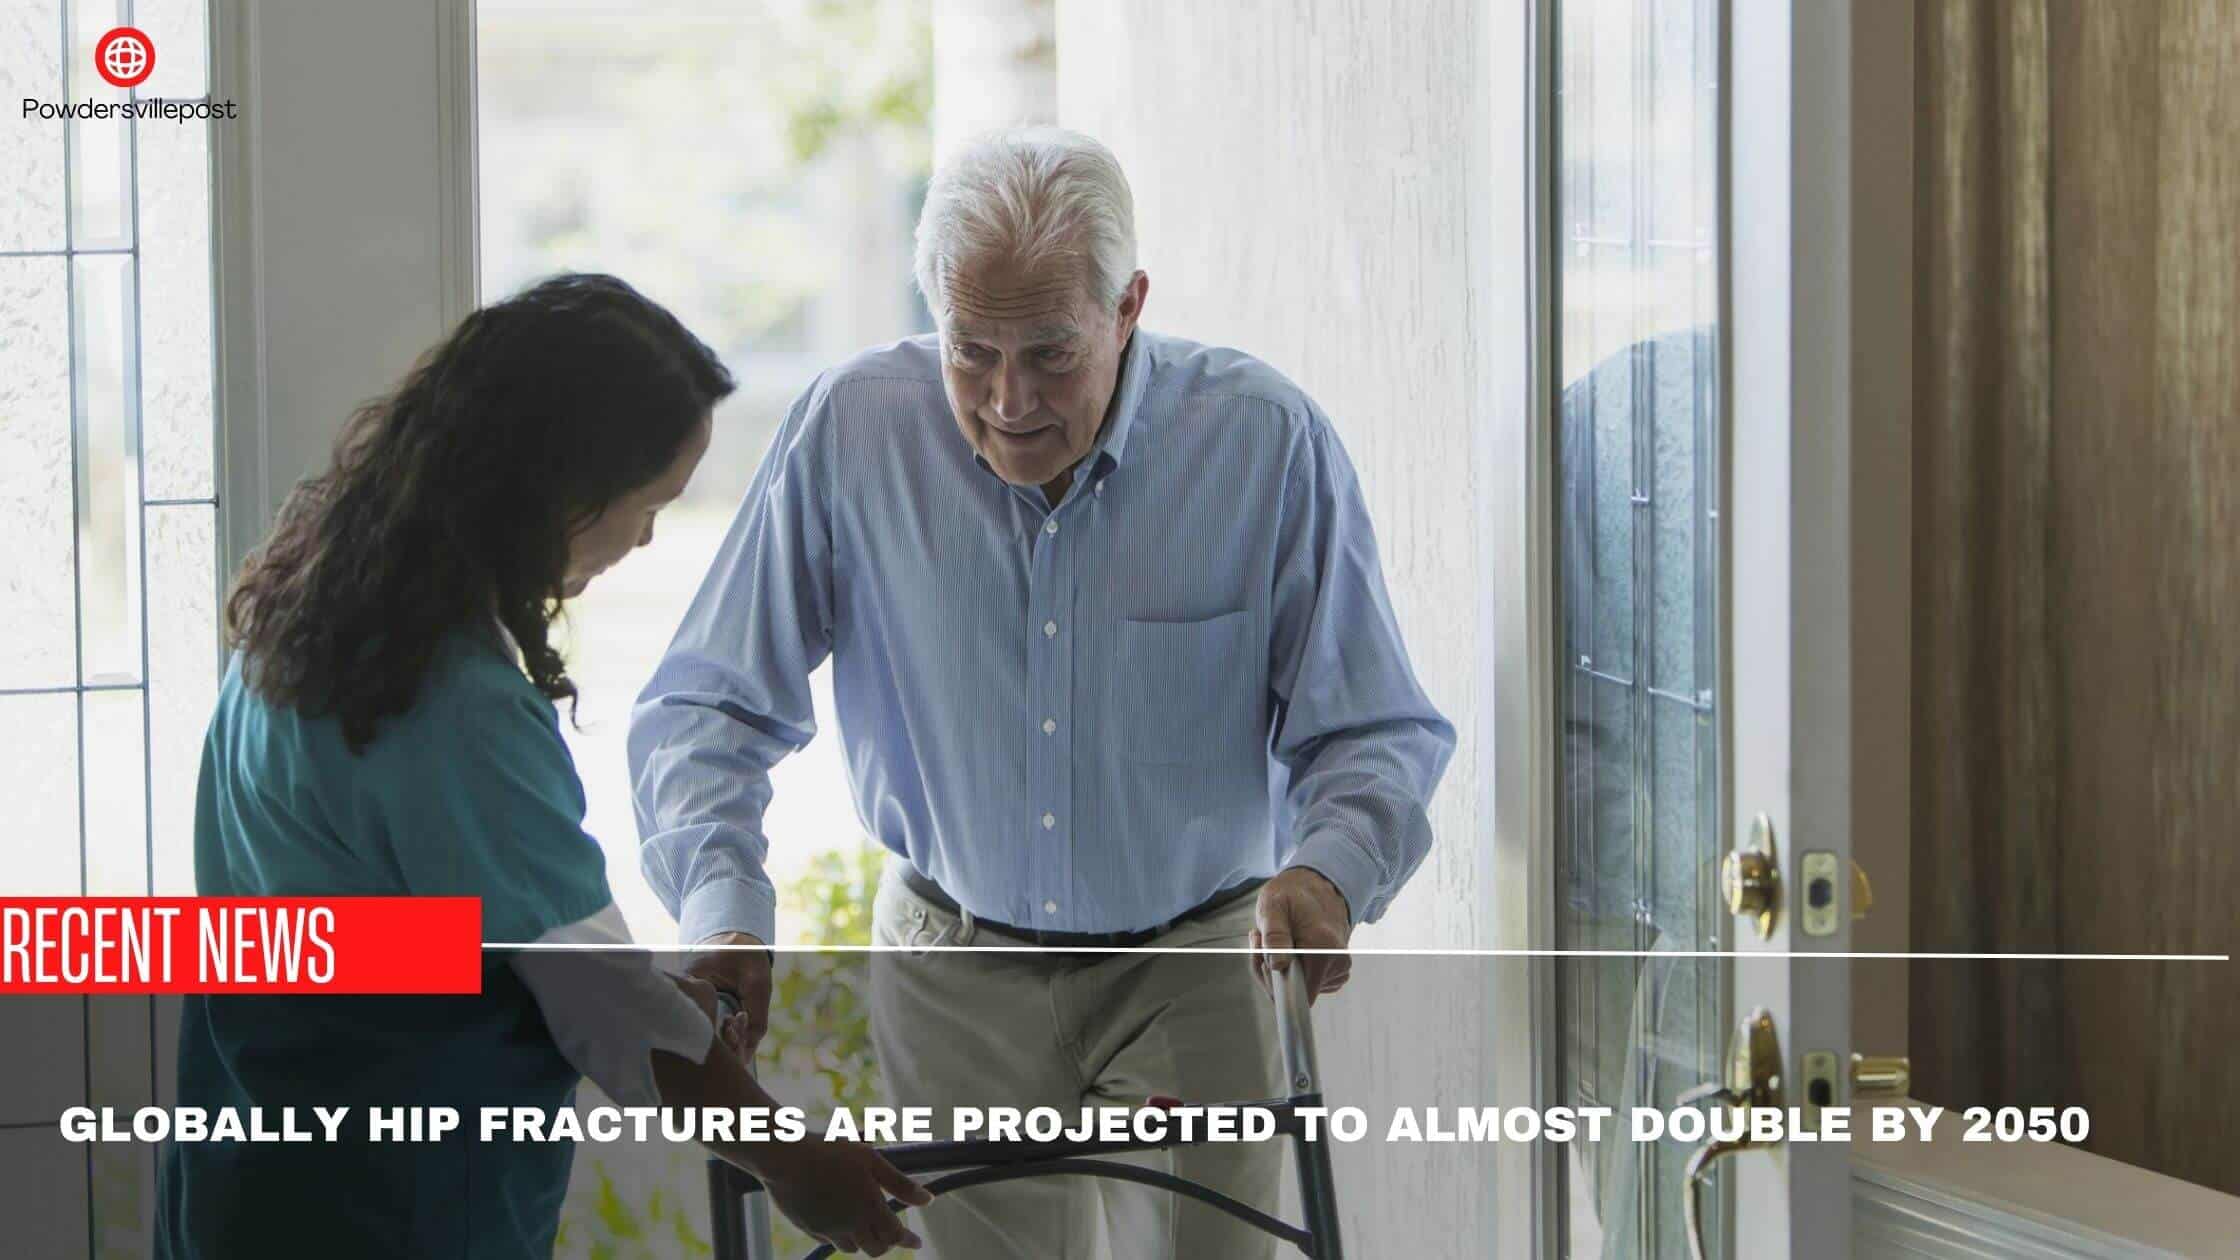 Globally Hip Fractures Are Projected To Almost Double By 2050